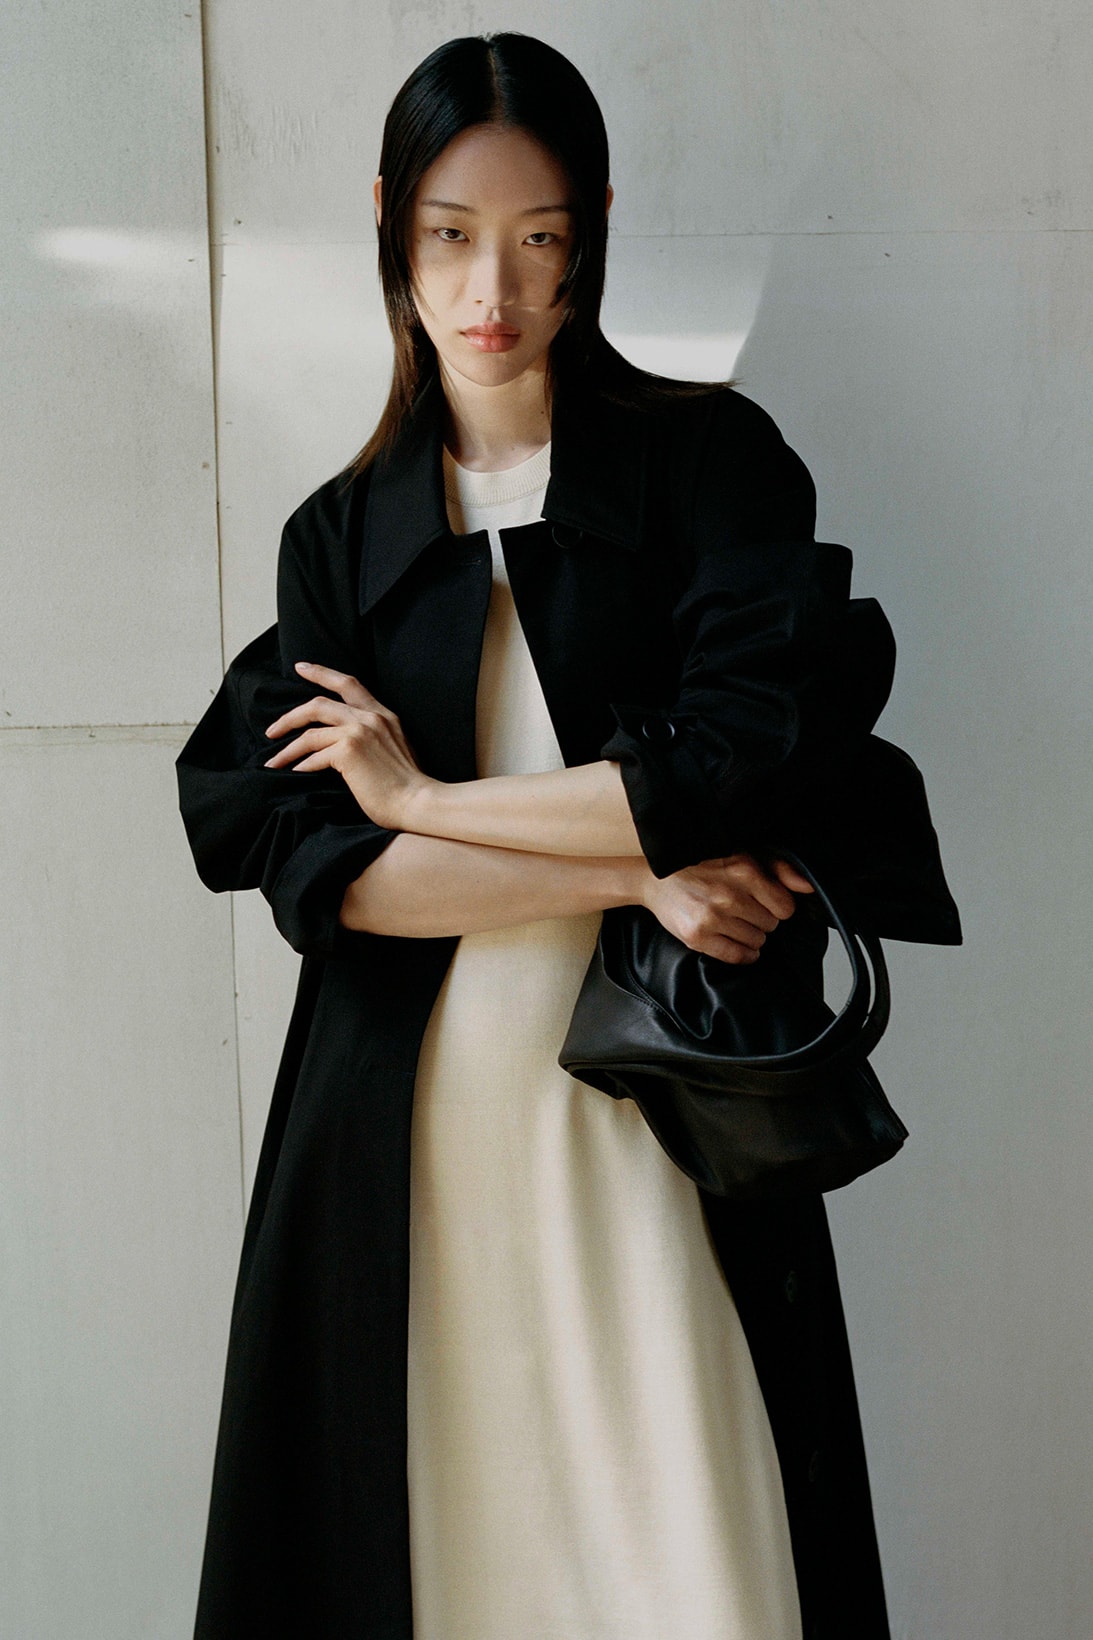 cos fall winter campaign new perspectives release minimal sharon alexie sora choi lara stone